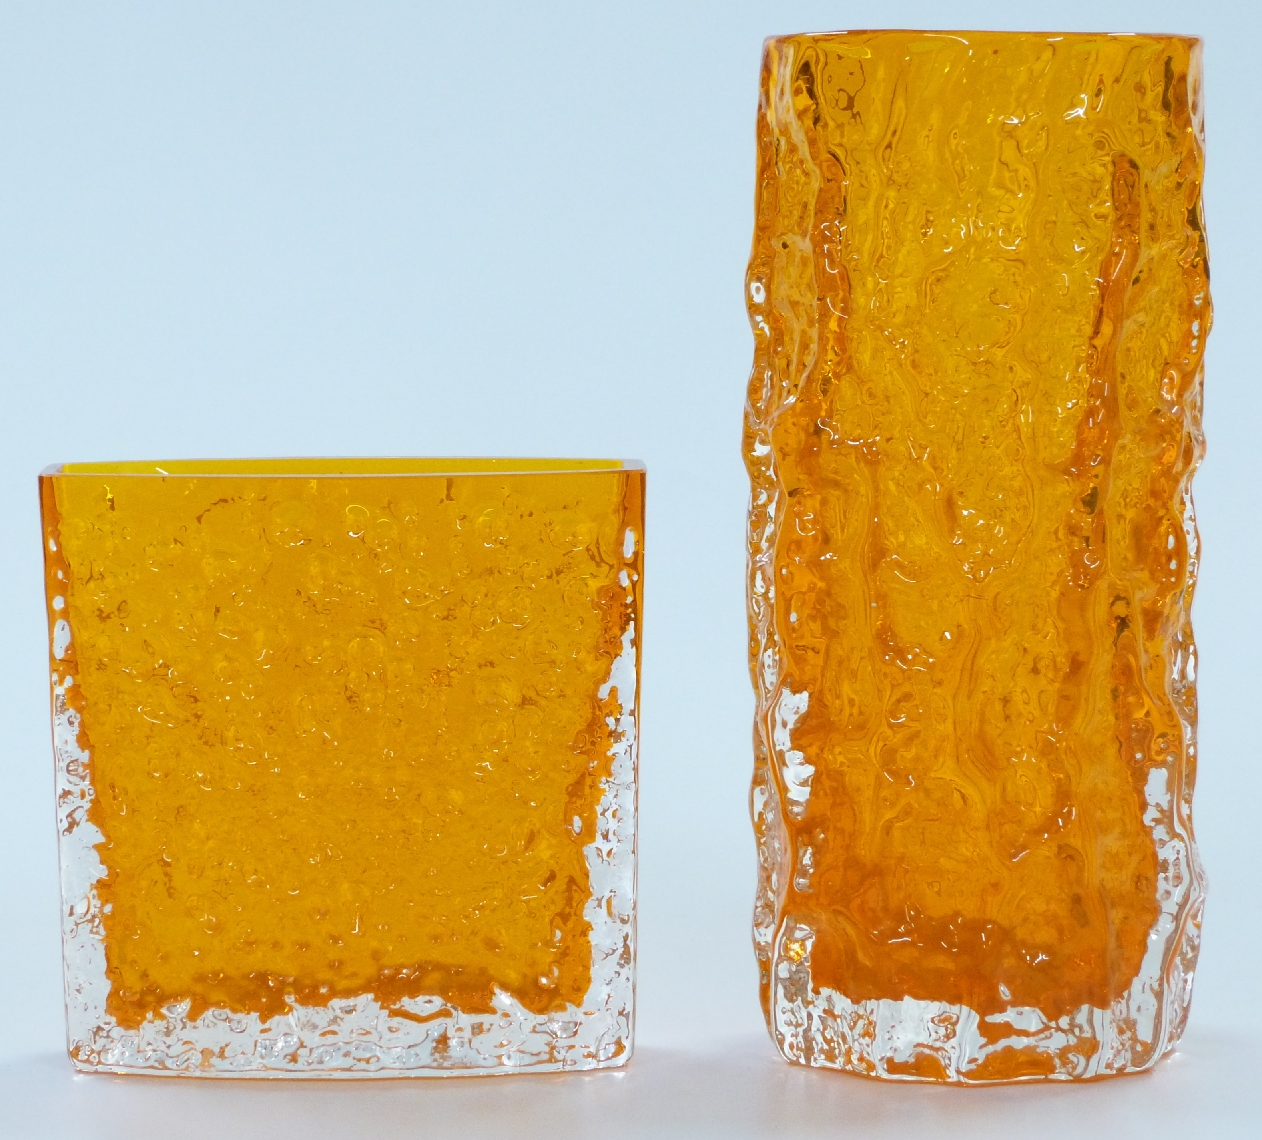 Two Geoffry Baxter Whitefriars textured bark glass vases in tangerine, largest 19cm tall